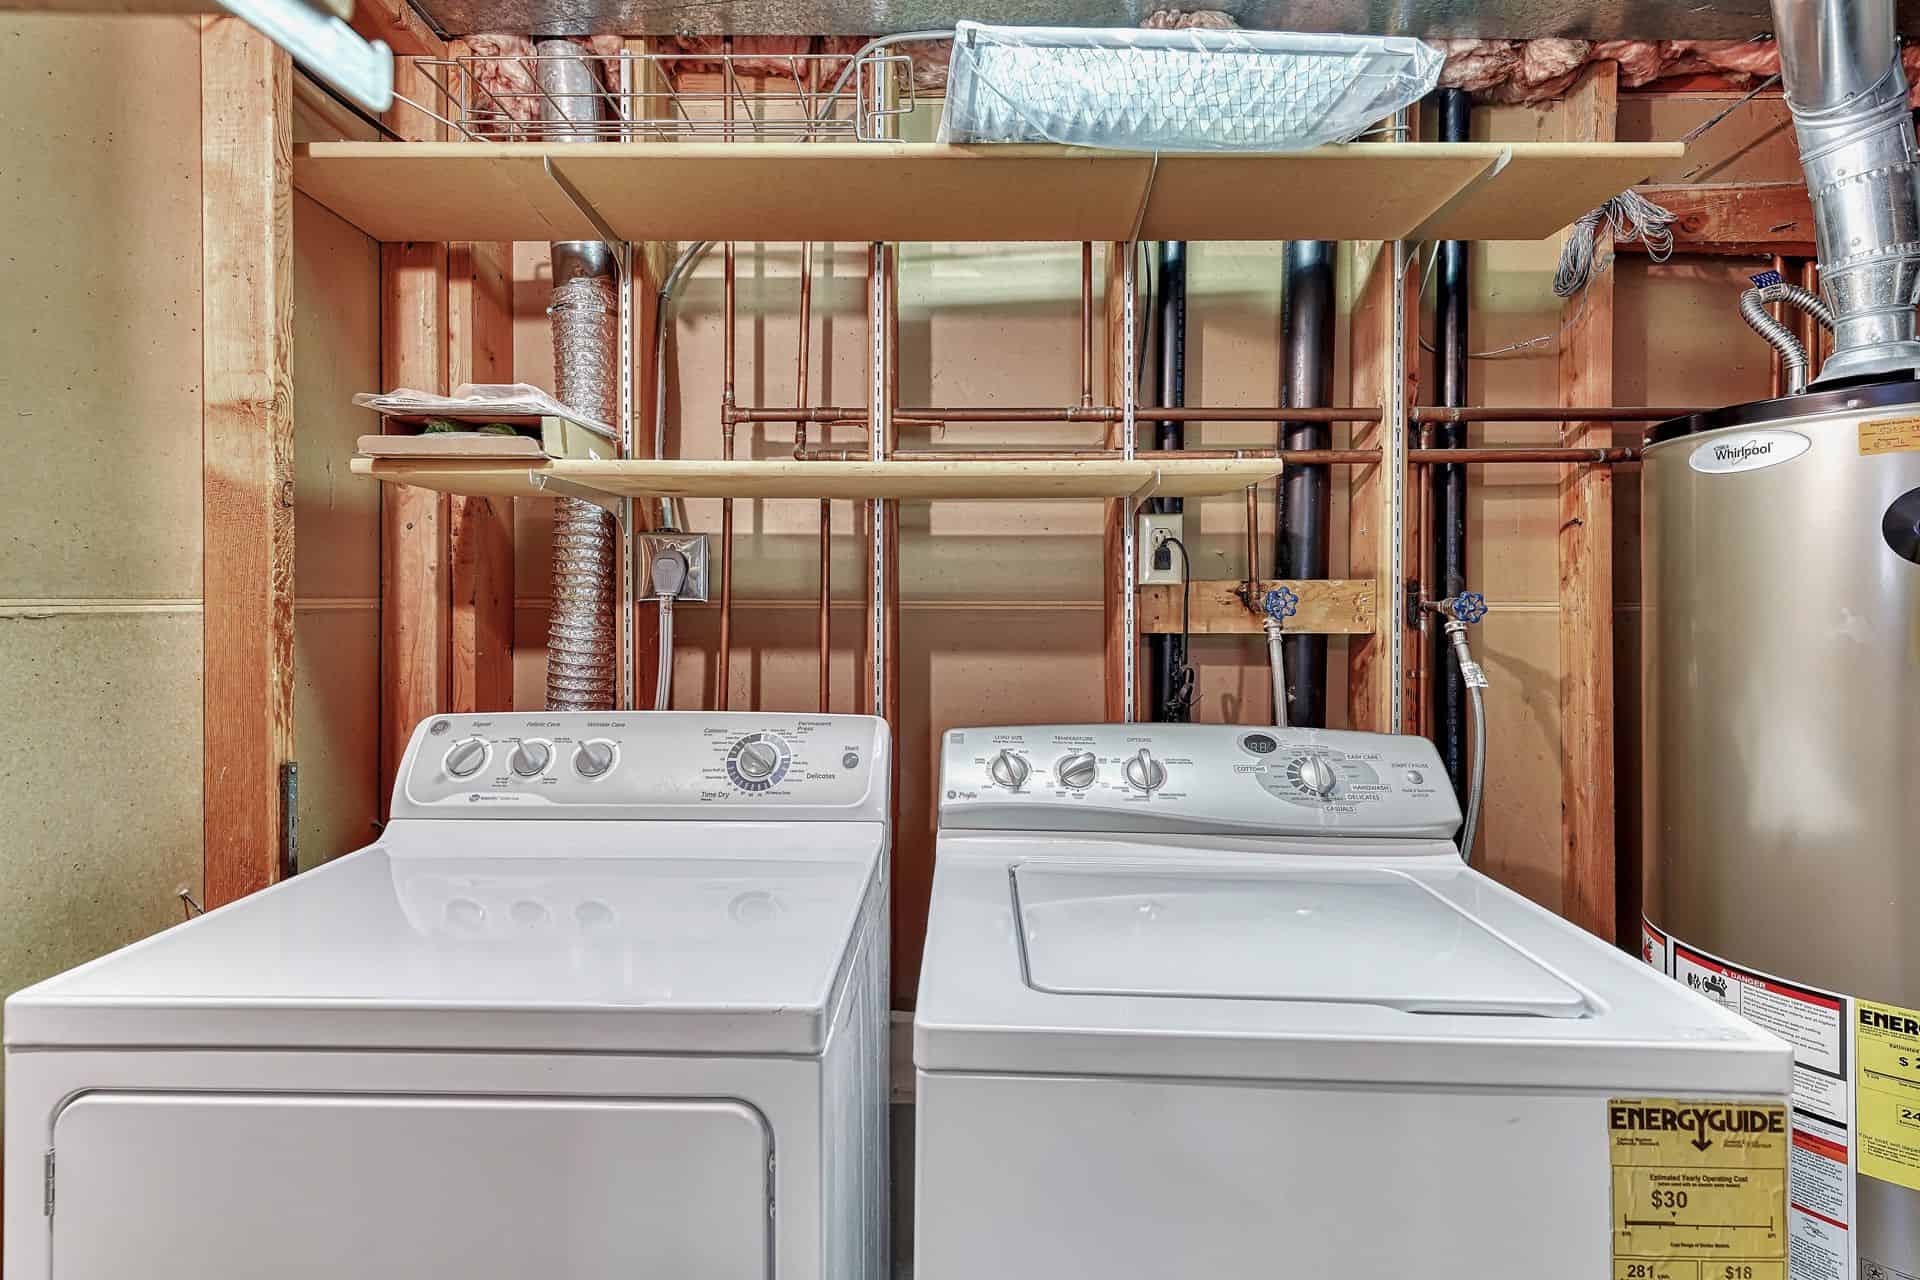 Laundry Room with Washer and Dryer that stay